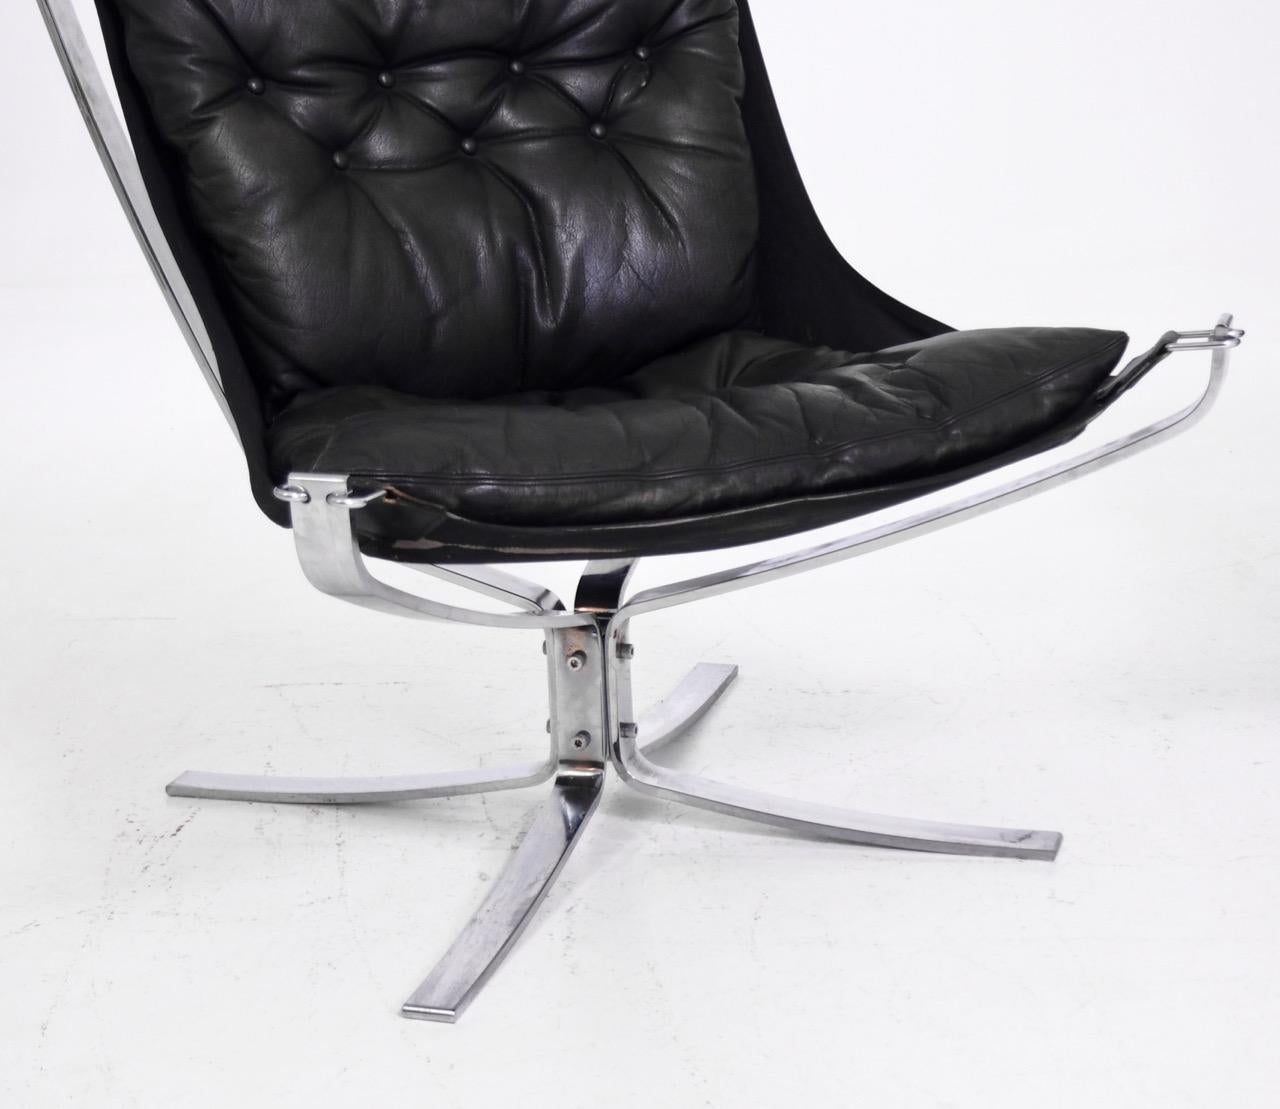 Pair of Falcon chairs by Vatne Møbler in Sweden, mid-20th century. In black leather and chromed steel.
Measures: H 83, W 77, D 75 cm
H 32.6, W 30.3, D 29.5 in.